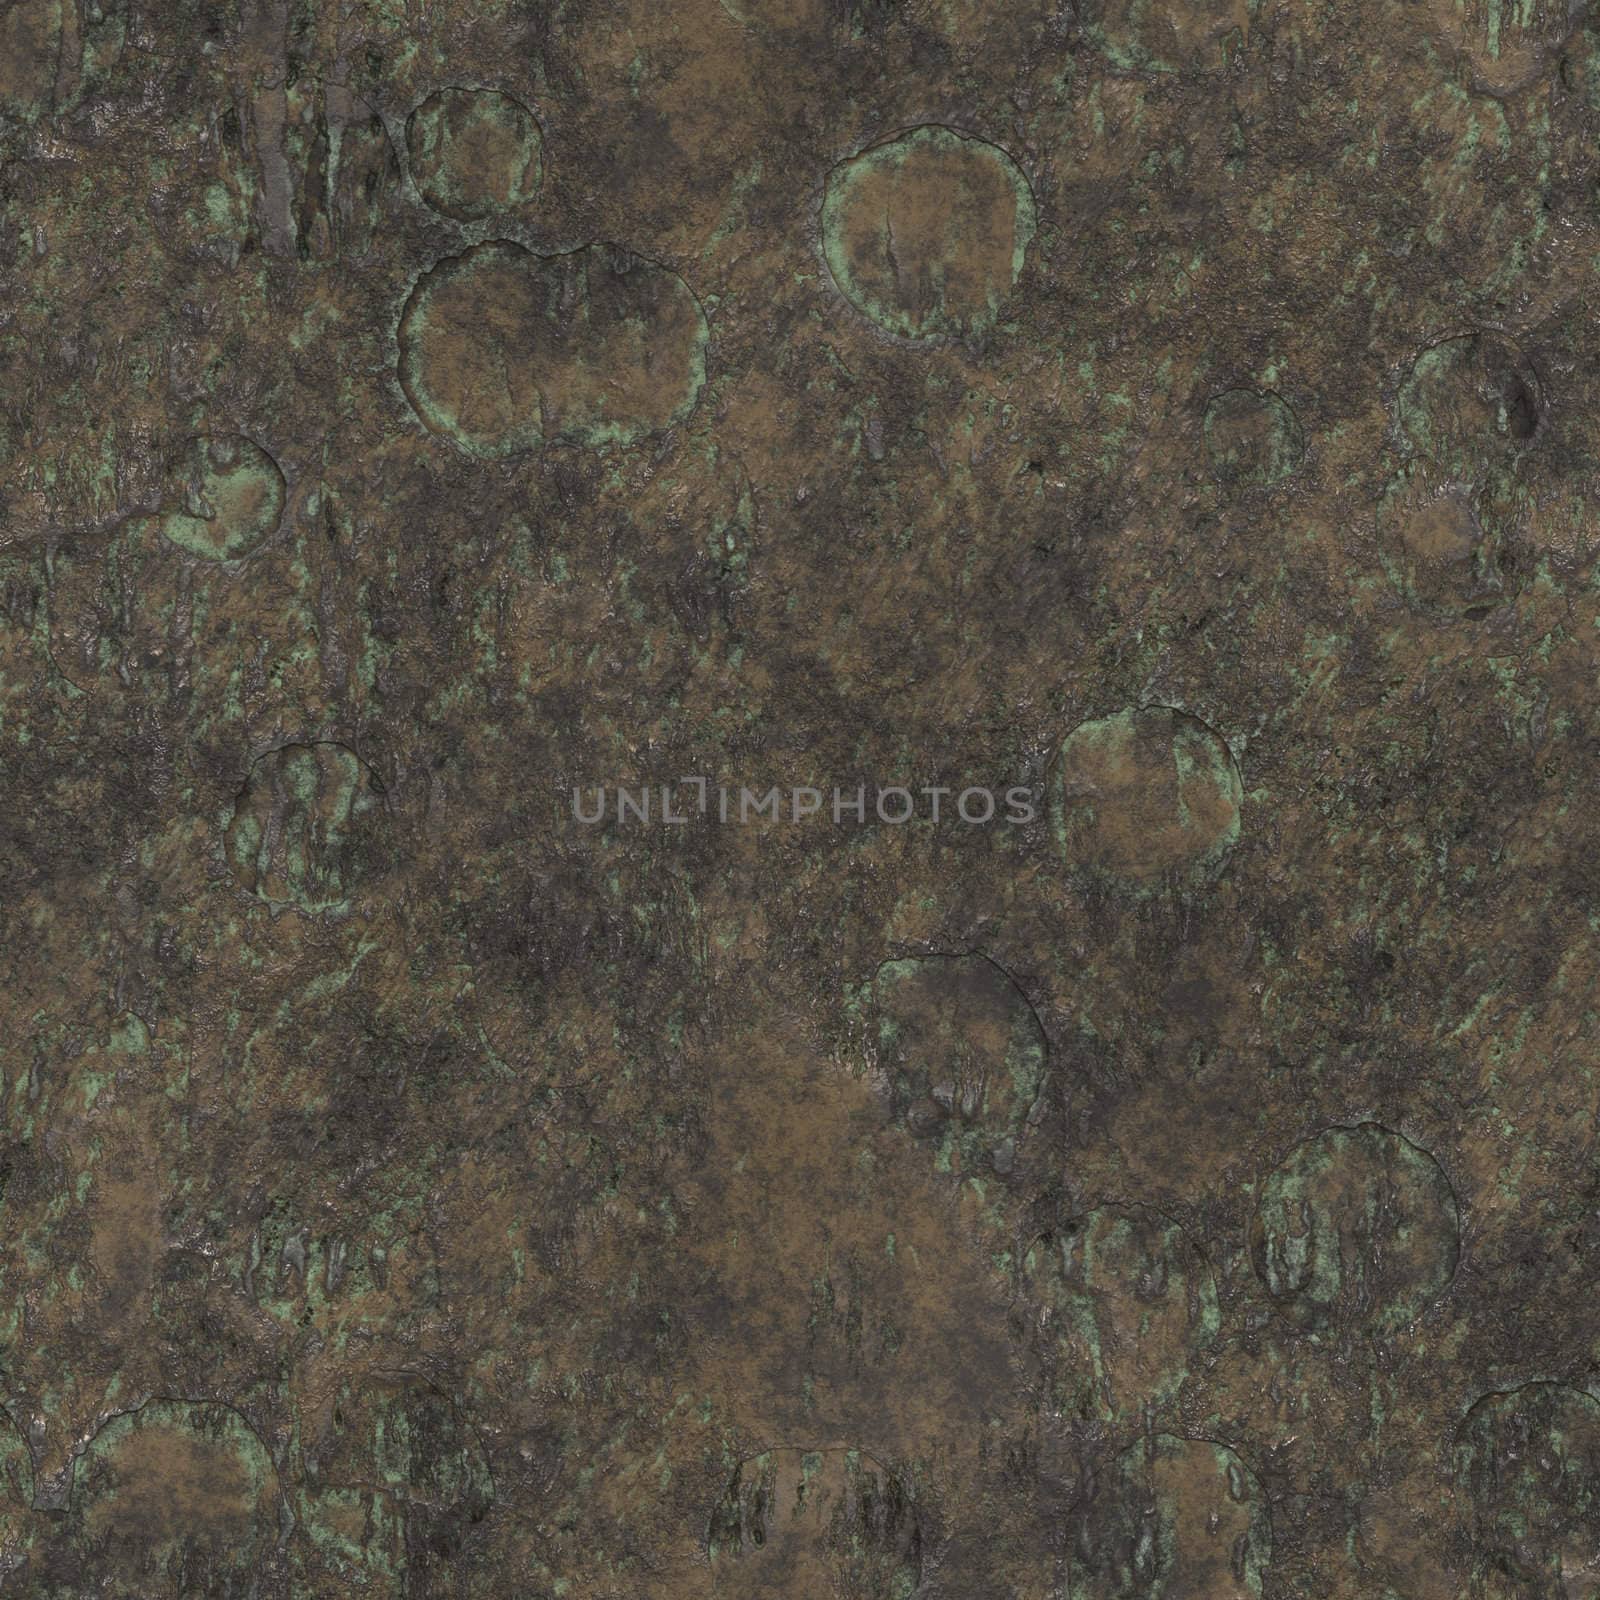 An image of a nice stone texture background